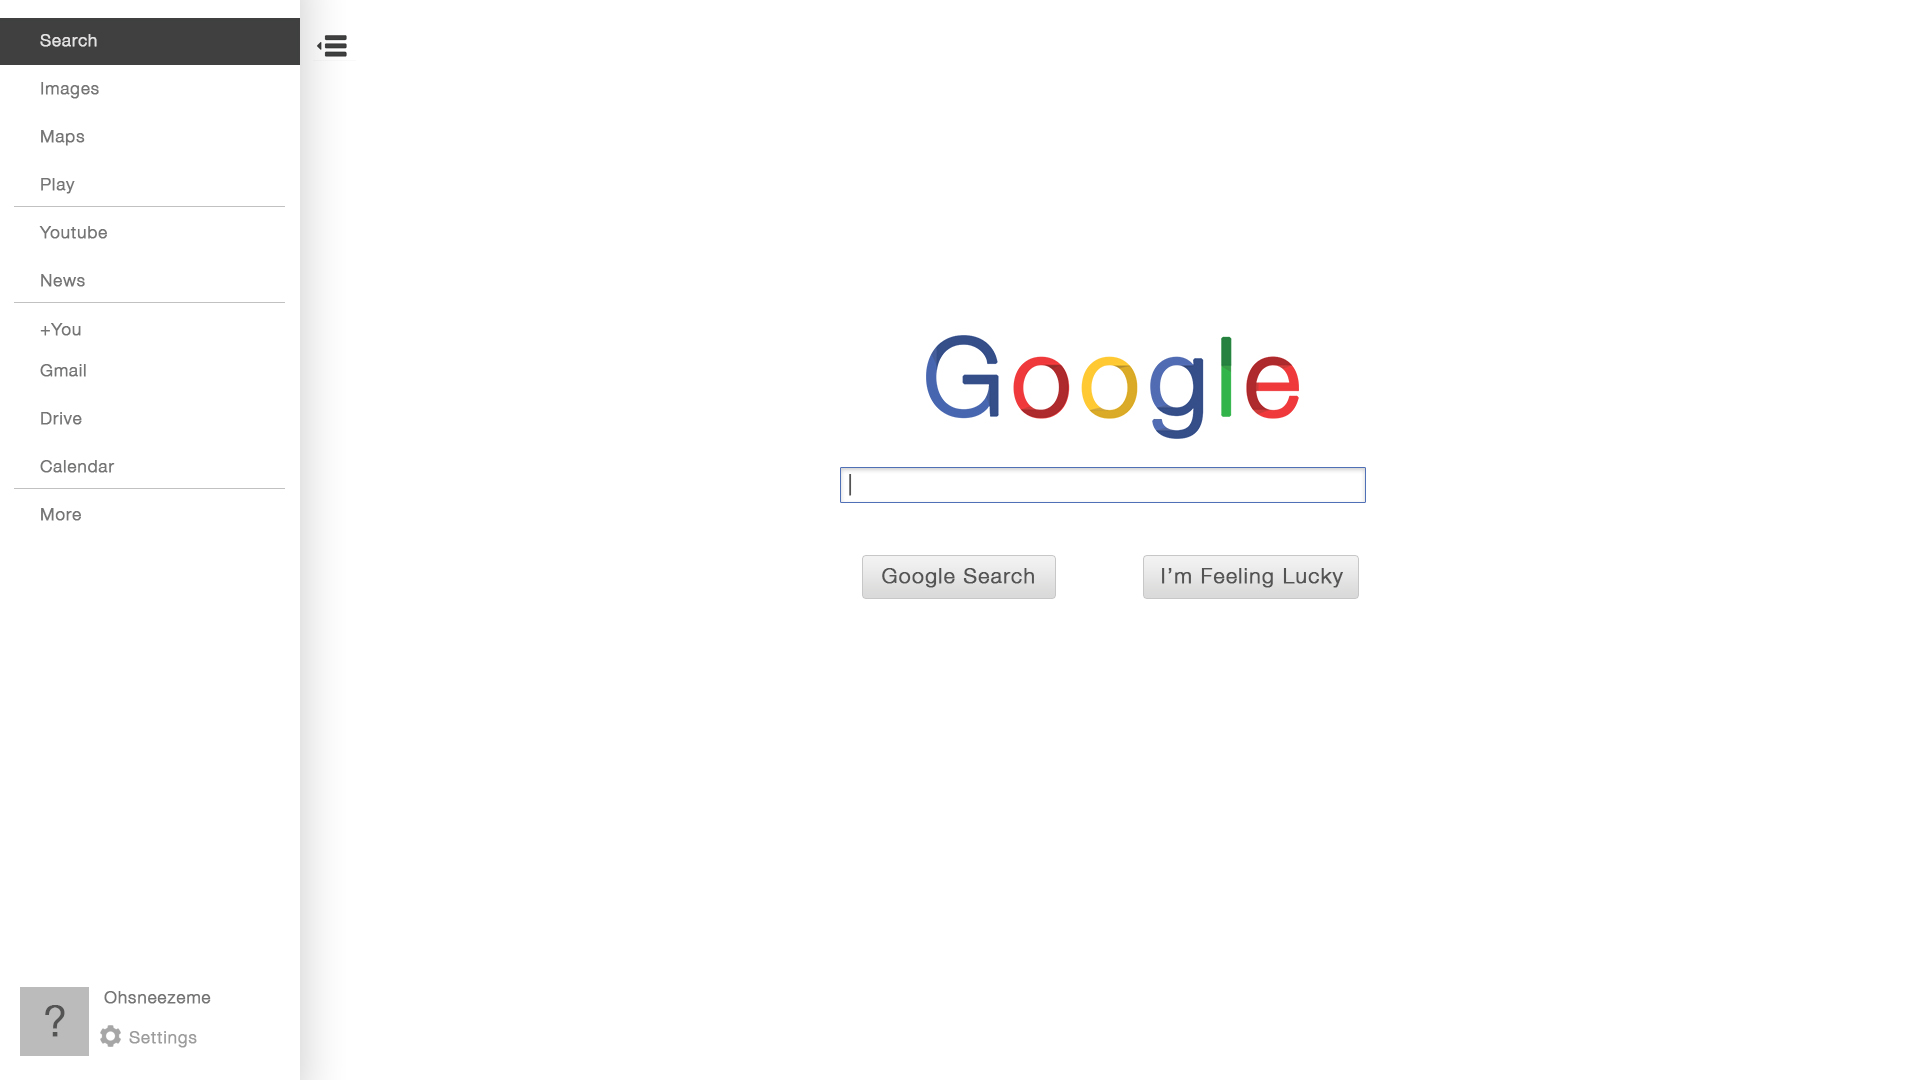 Google Home Redesign By Ohsneezeme